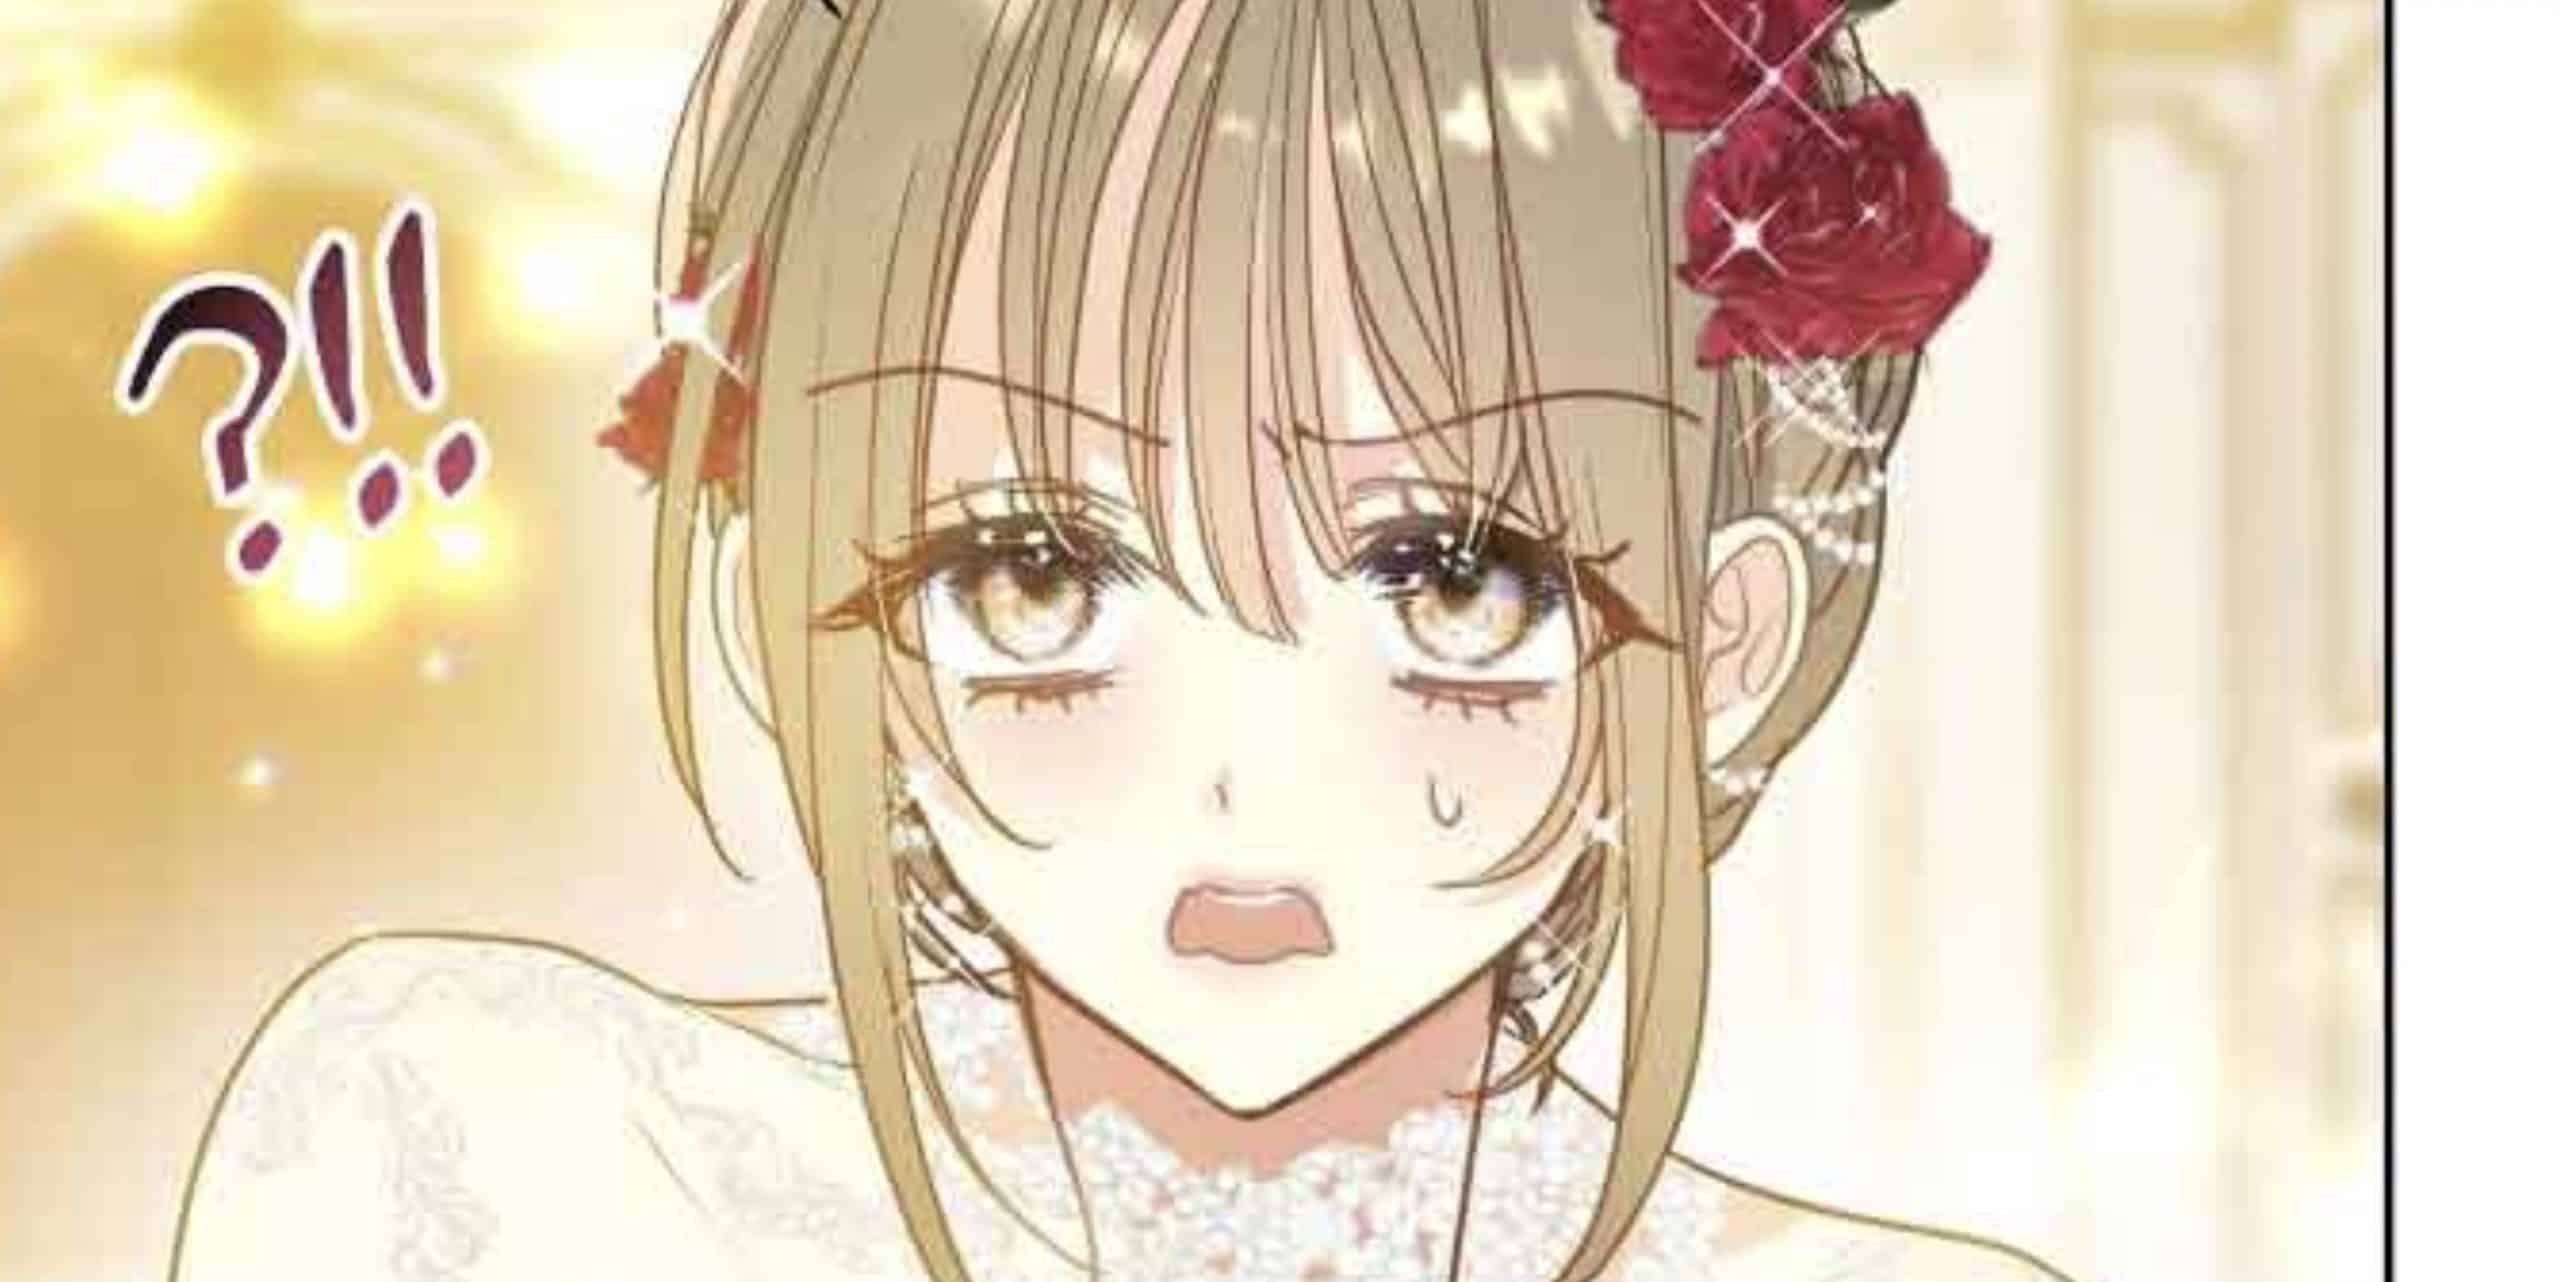 Your Majesty, Please Don’t Kill Me Again Chapter 102 release date